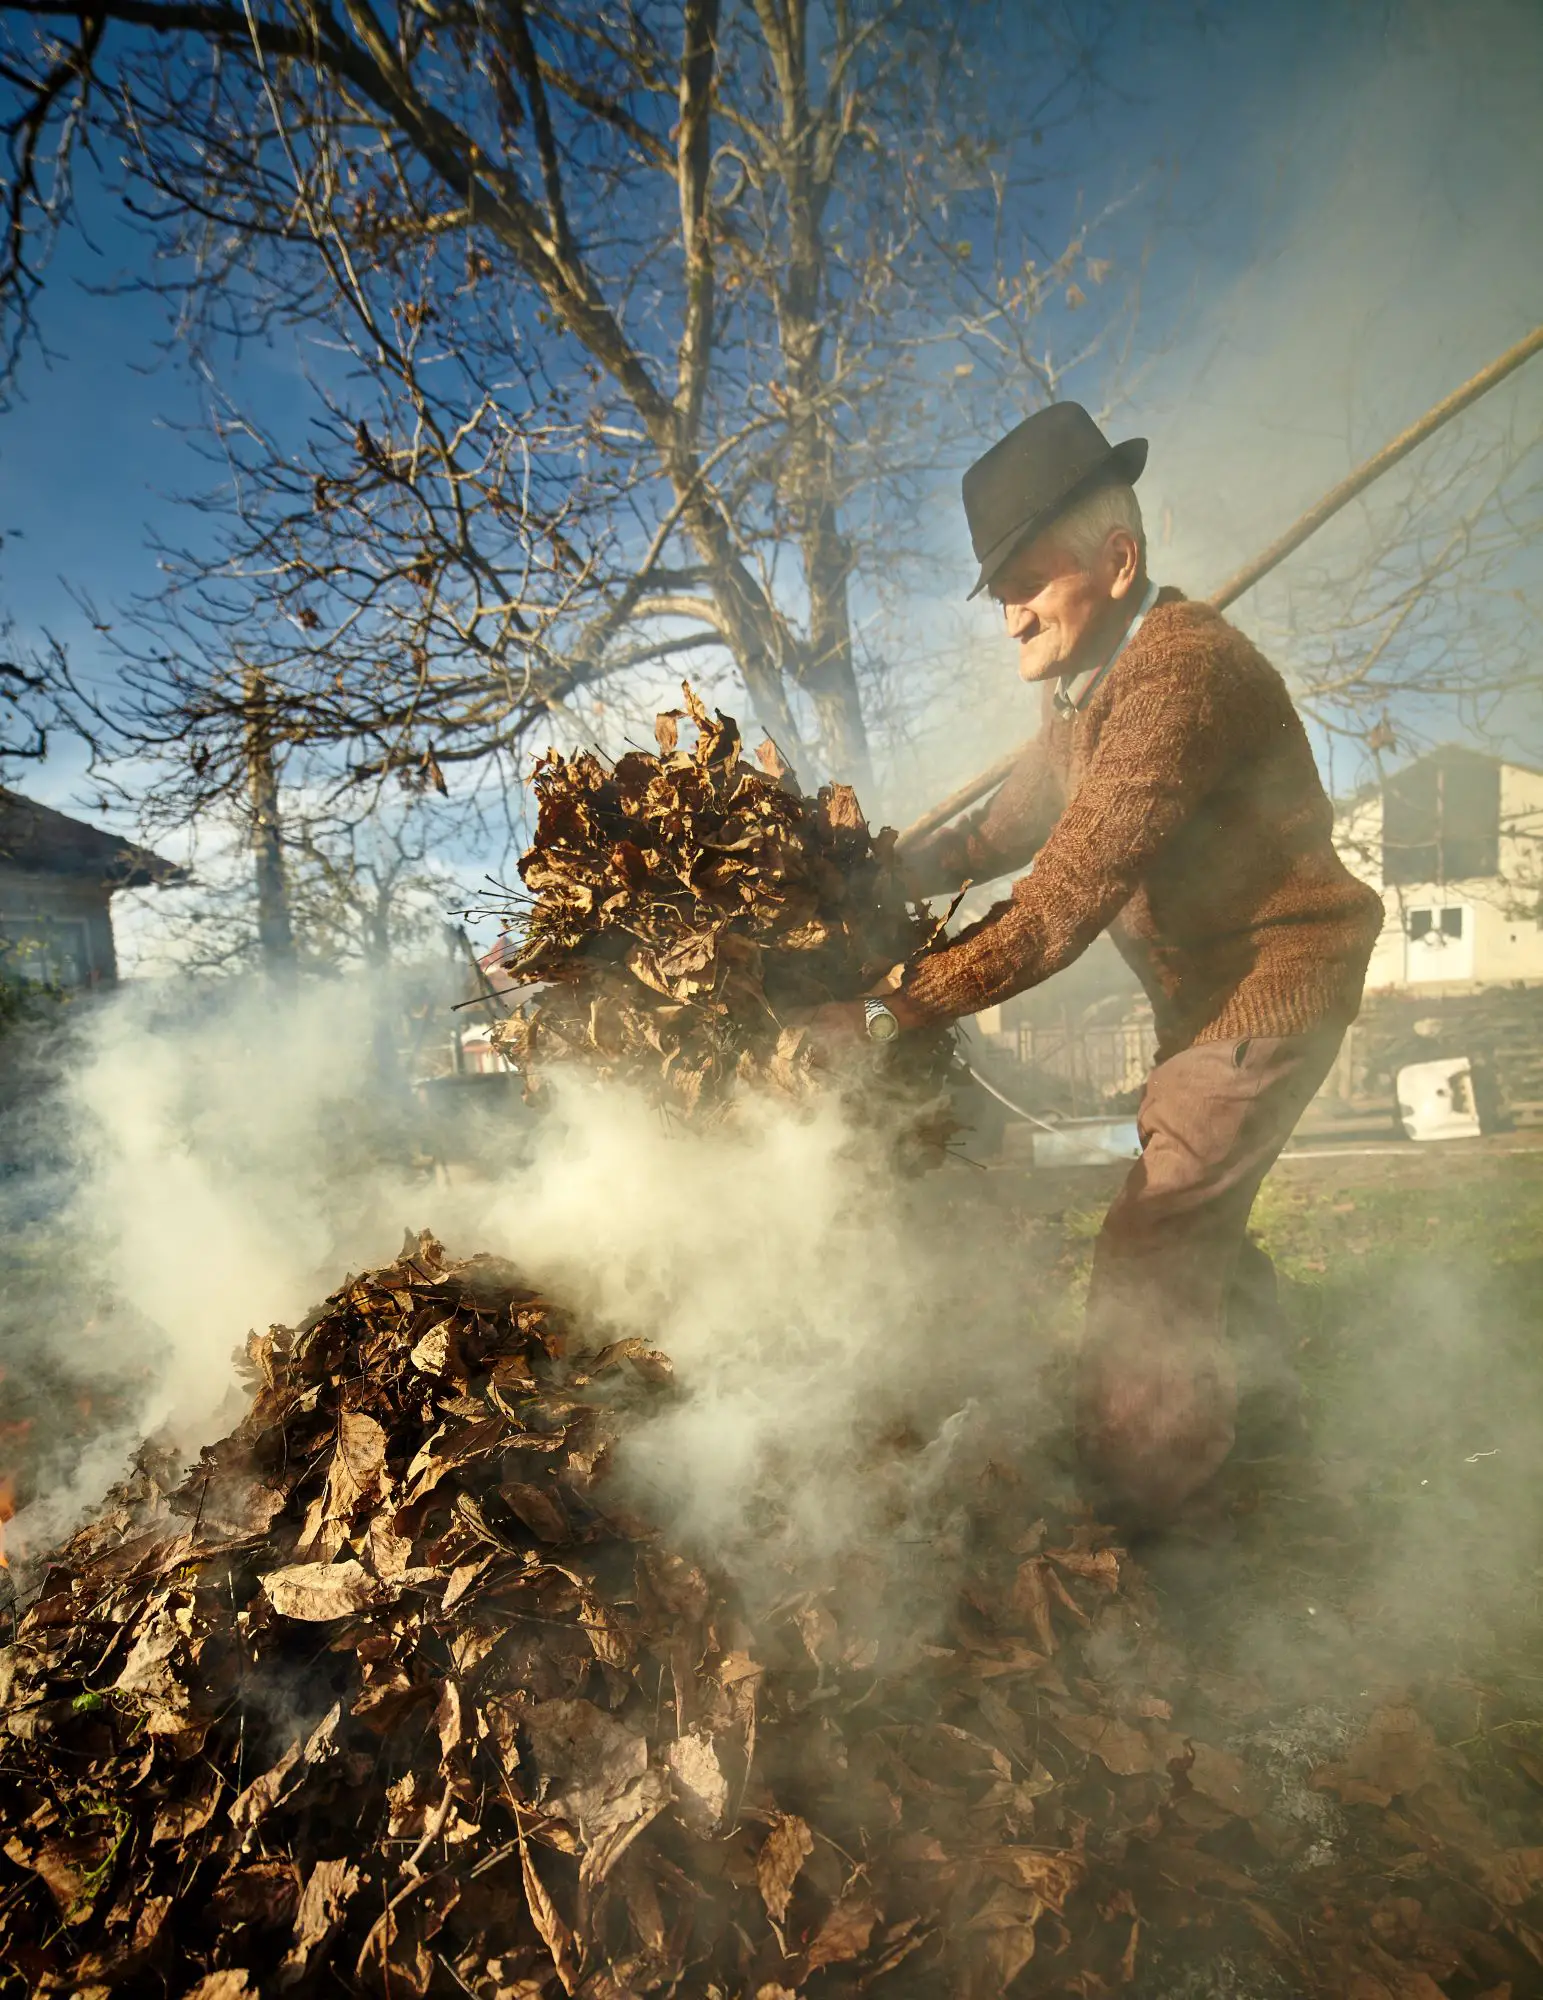 Is Burning Leaves Bad for the Environment? (7 Quick Facts)